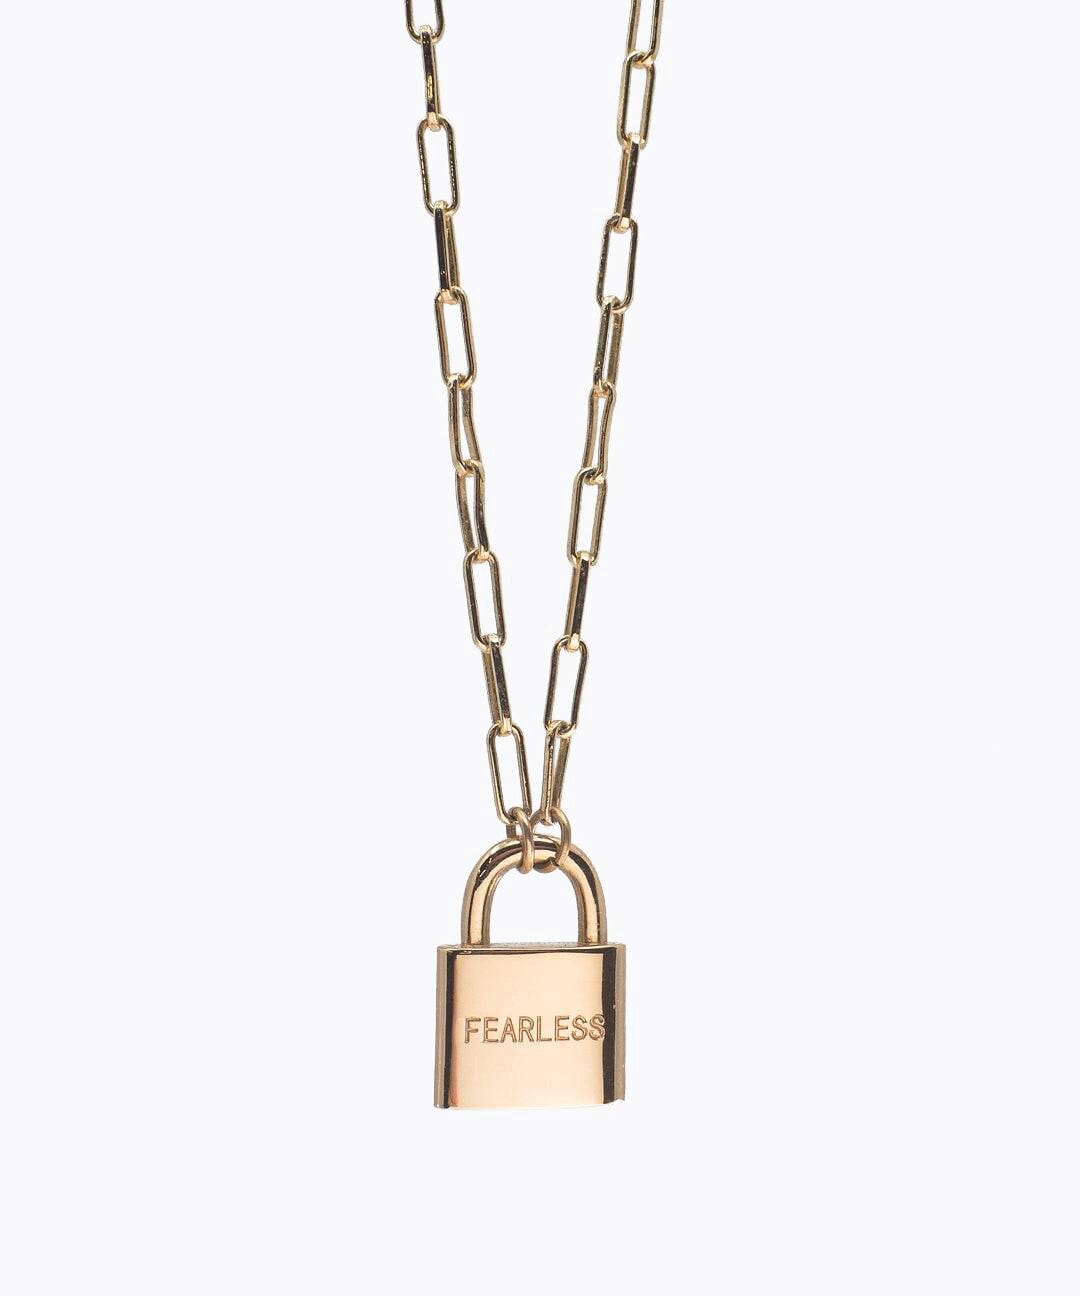 Padlock Necklace, Lock Chain Necklace